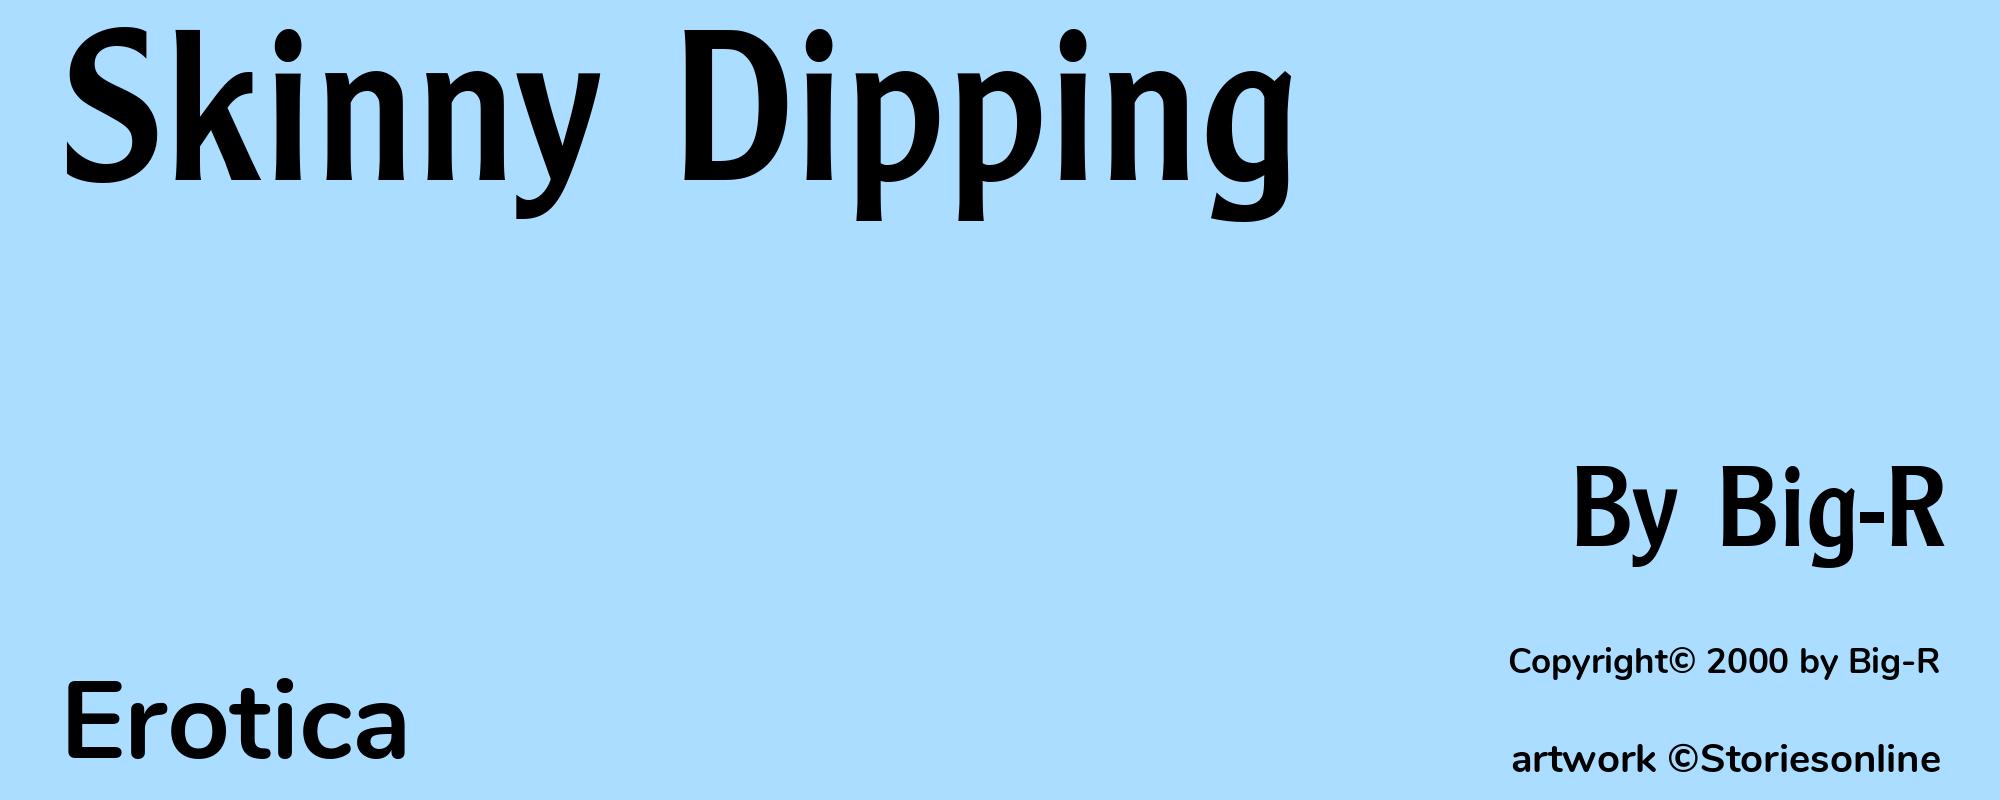 Skinny Dipping - Cover